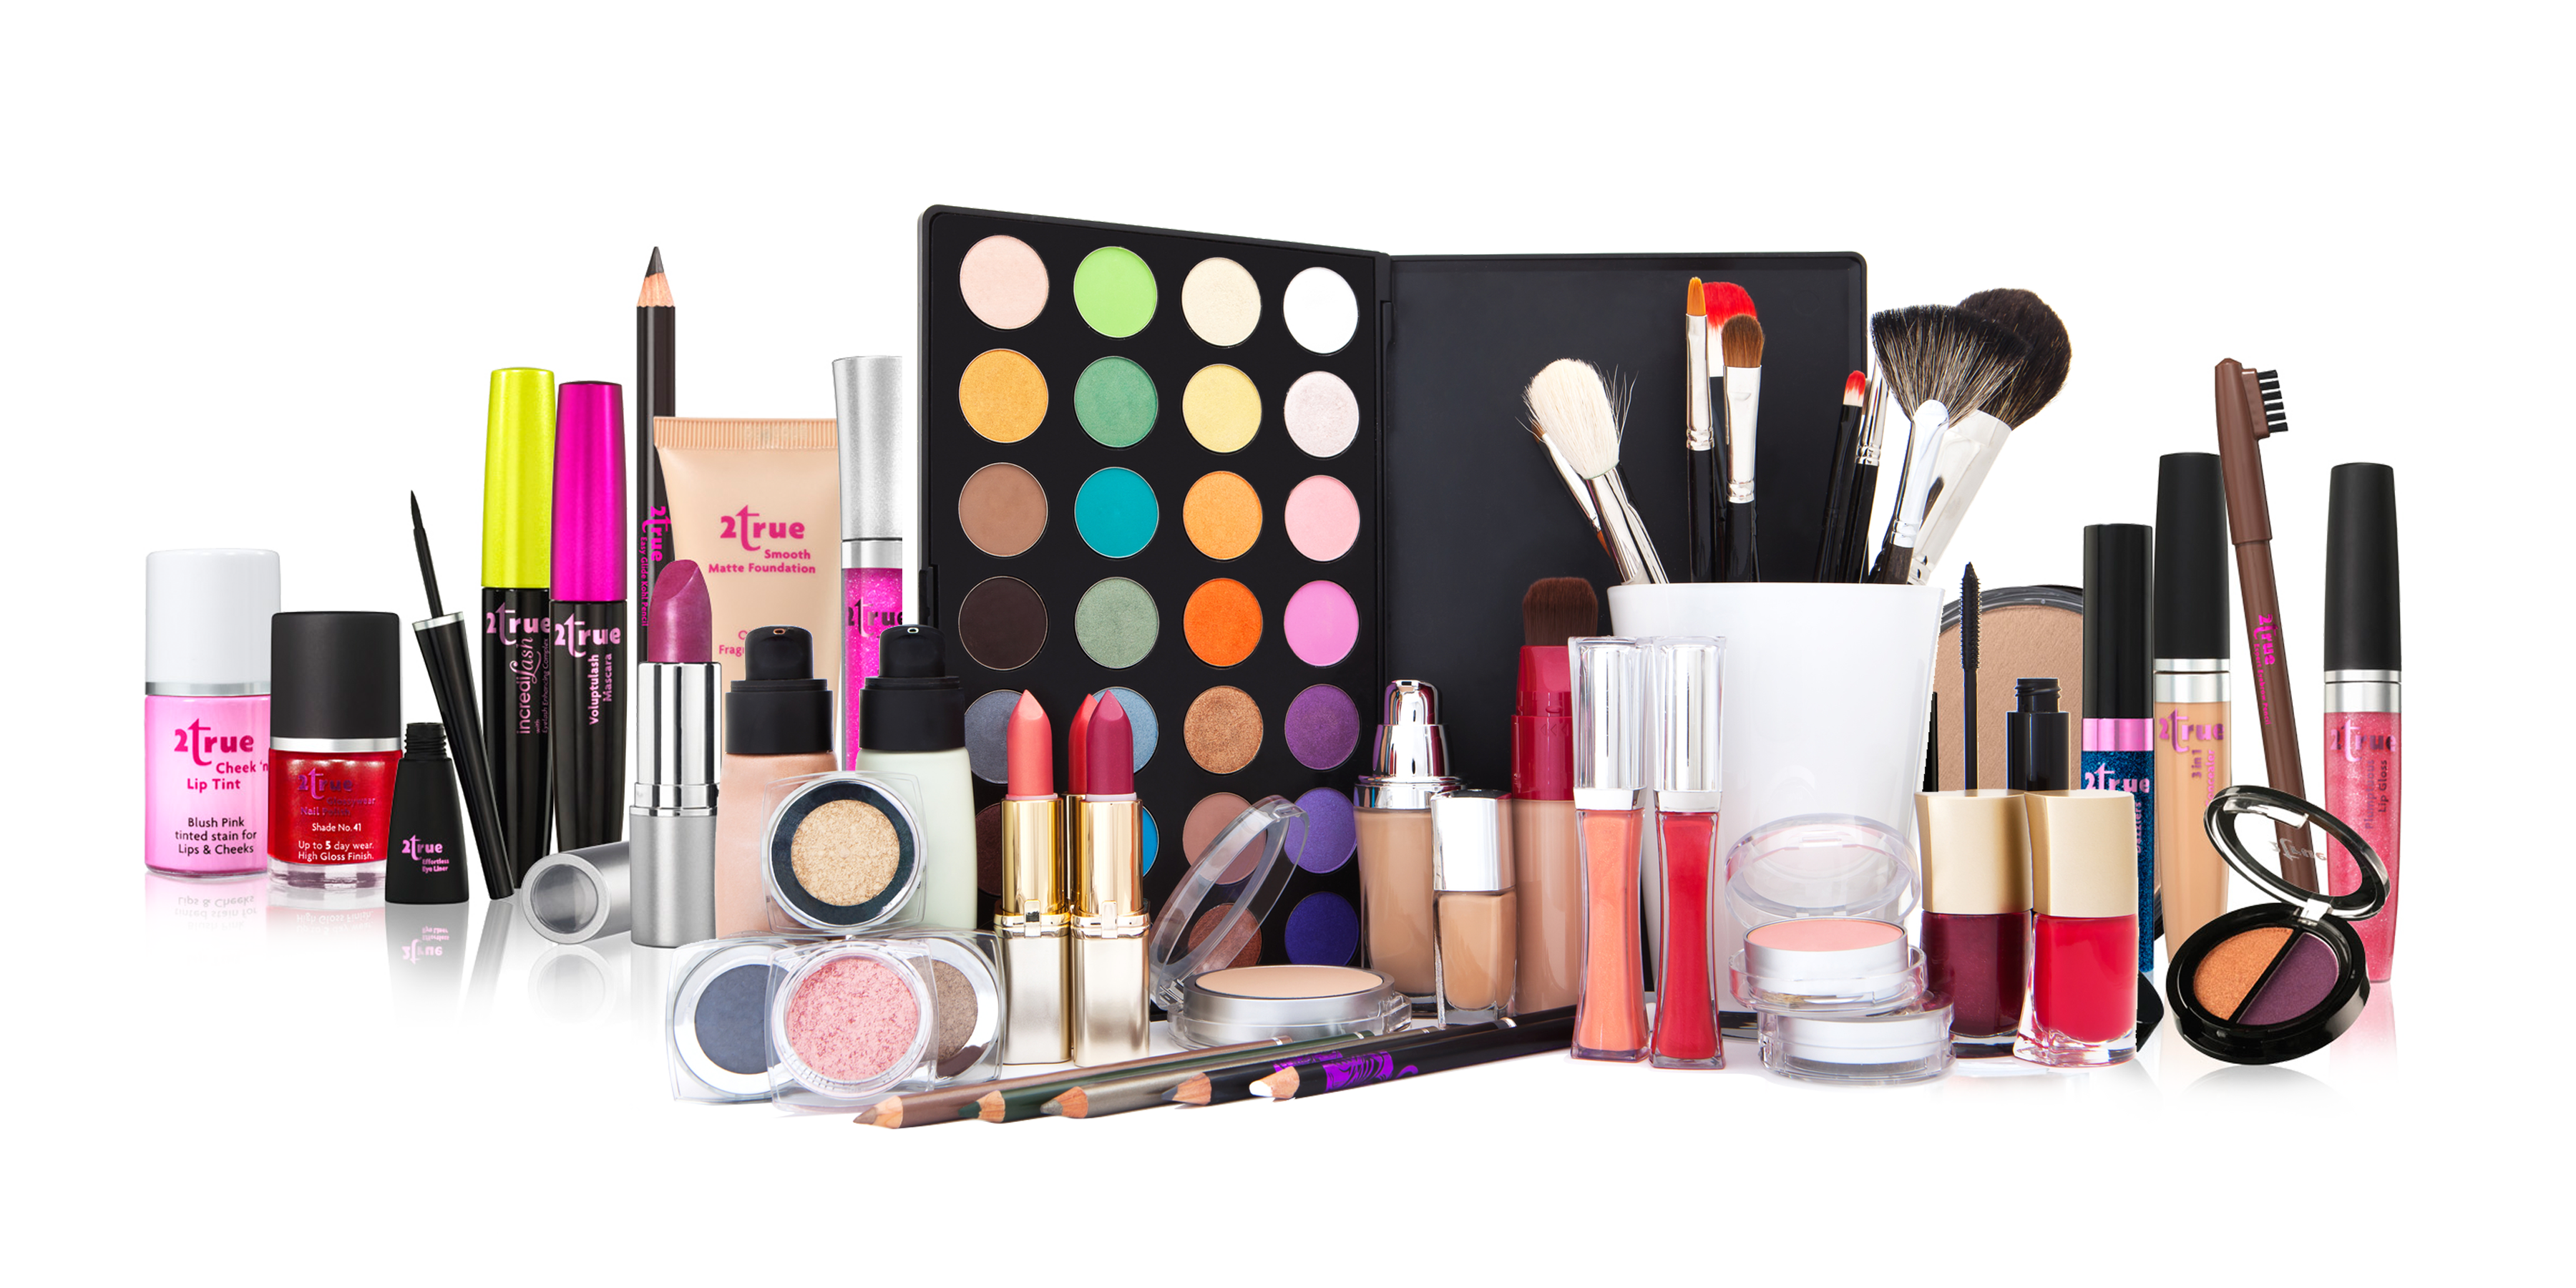 Product Pic Cosmetics HD Image Free PNG Image